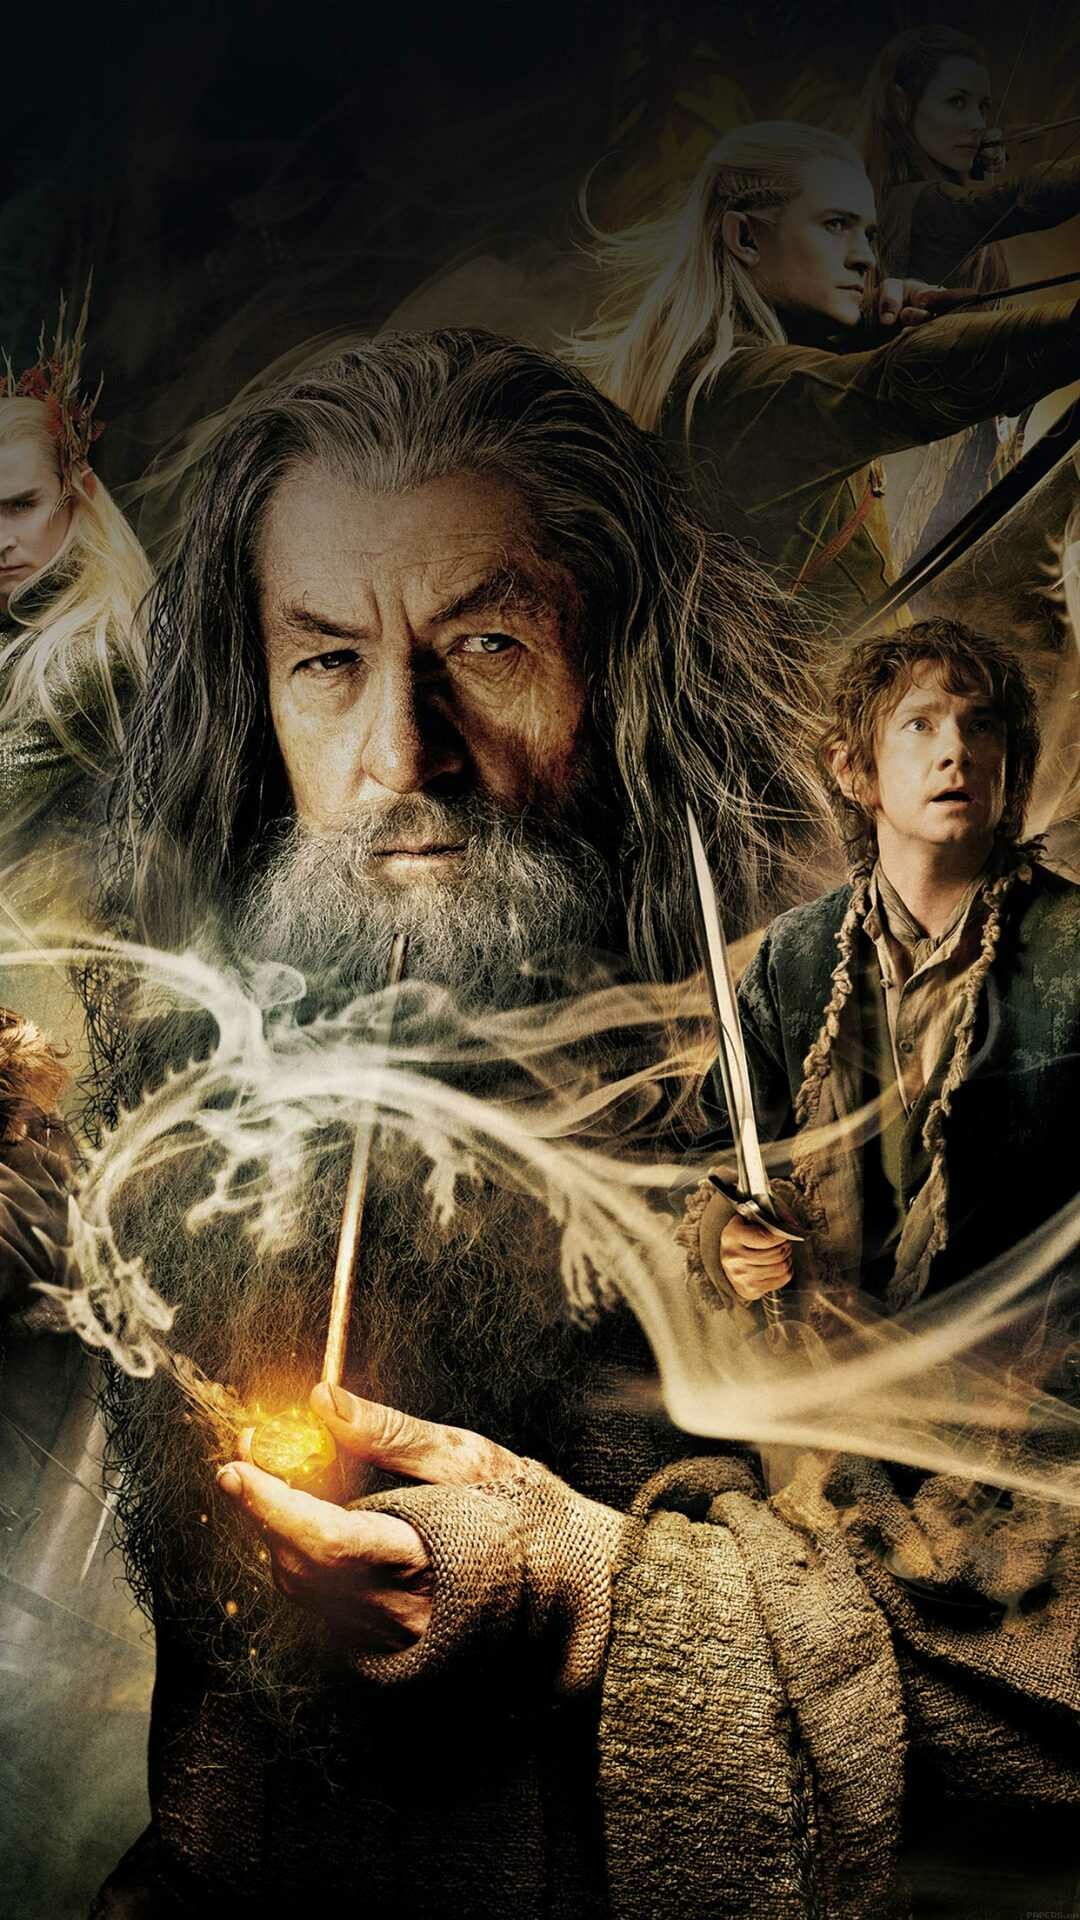 The Lord of the Rings: The Hobbit: The Desolation of Smaug, A prequel to Jackson's LOTR trilogy. 1080x1920 Full HD Wallpaper.